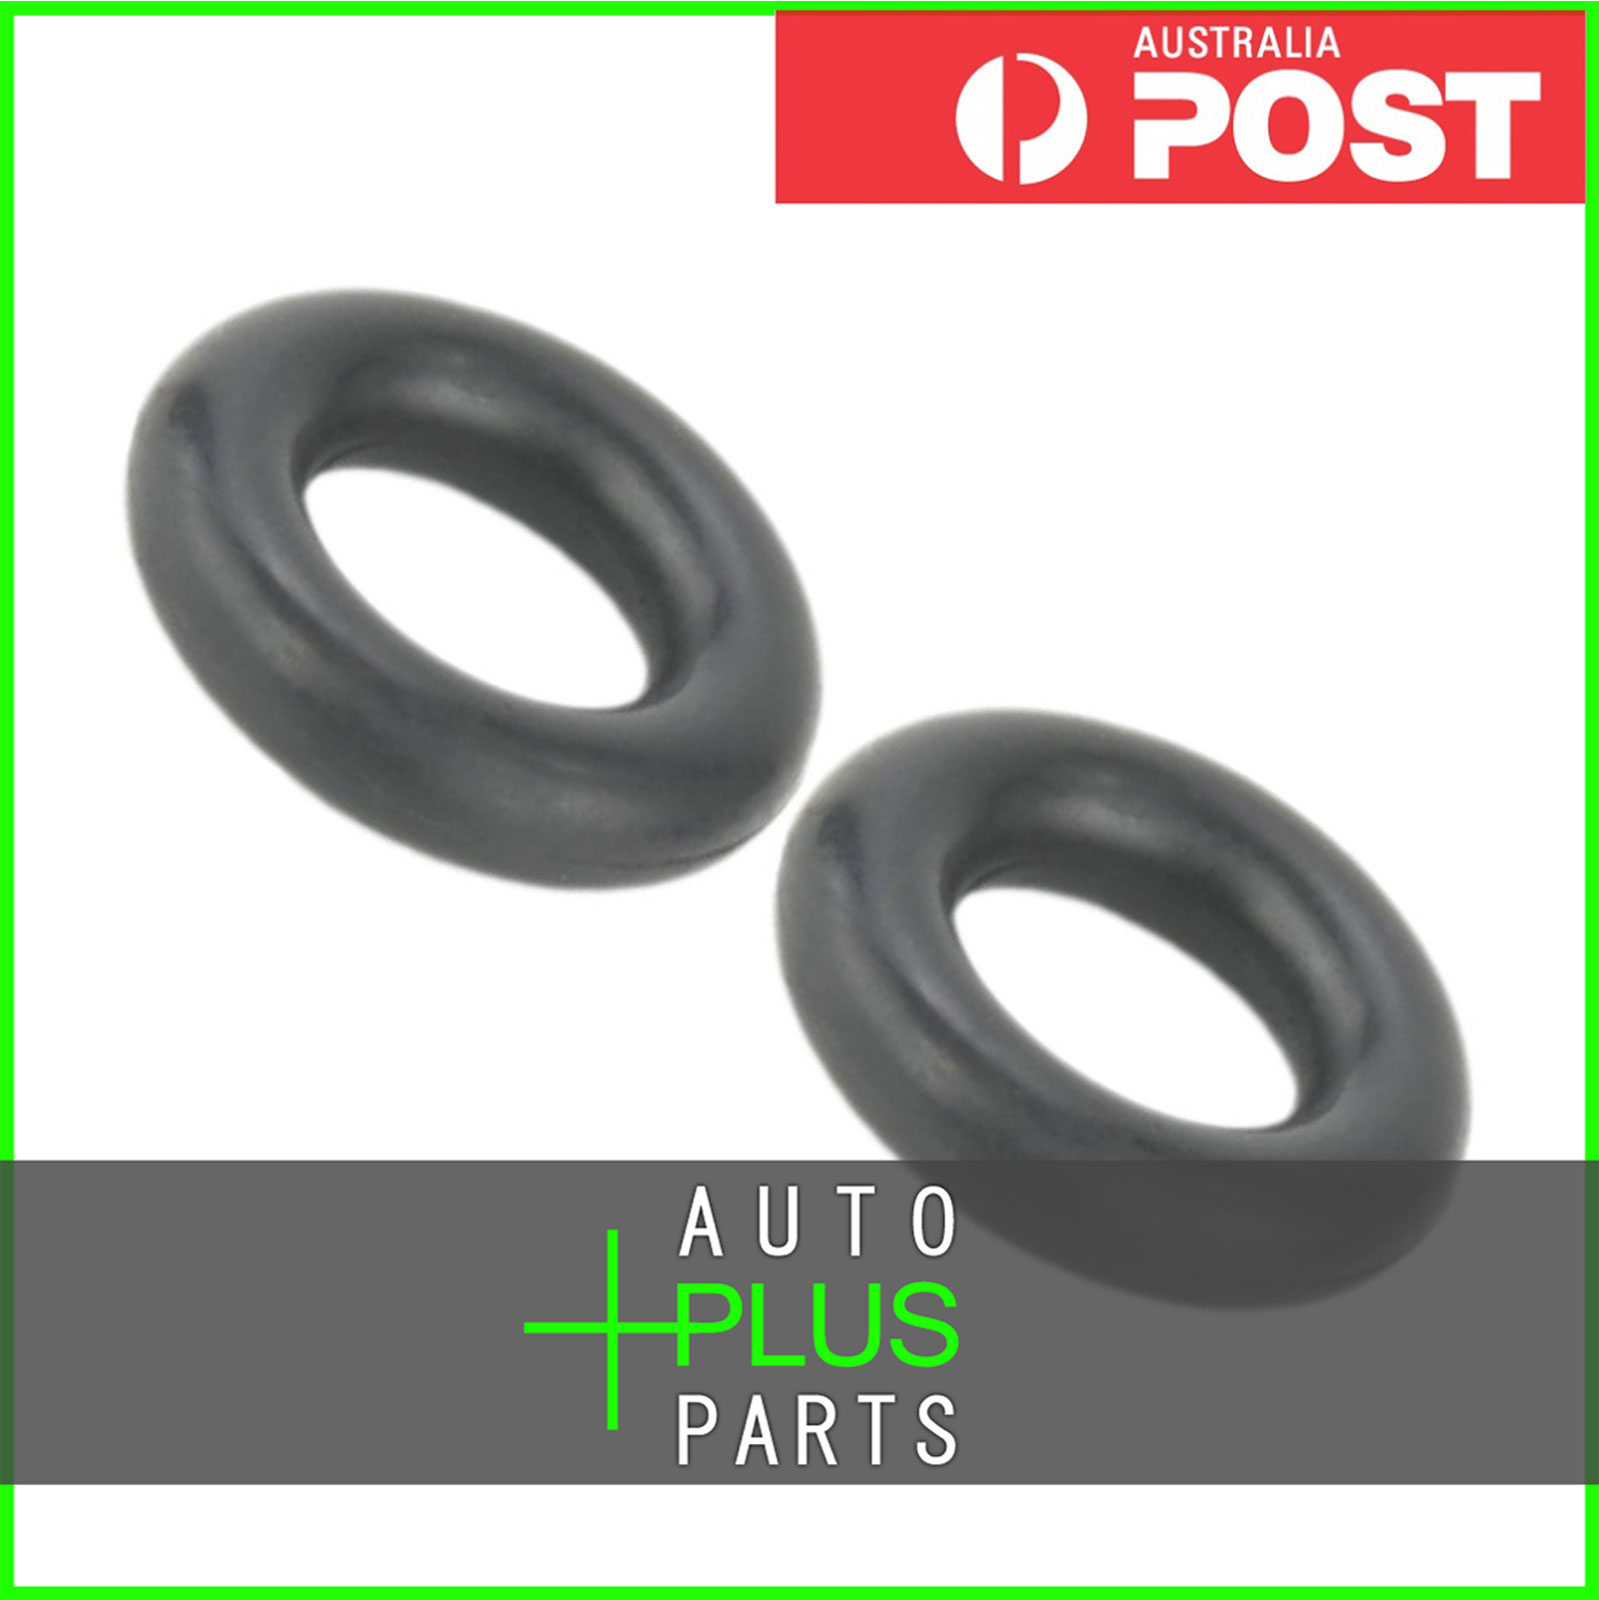 Fits HONDA MOBILIO O-RING FUEL INJECTOR PCS 2 - ALMAS,DD4,MOBILIO,SPIKE Product Photo